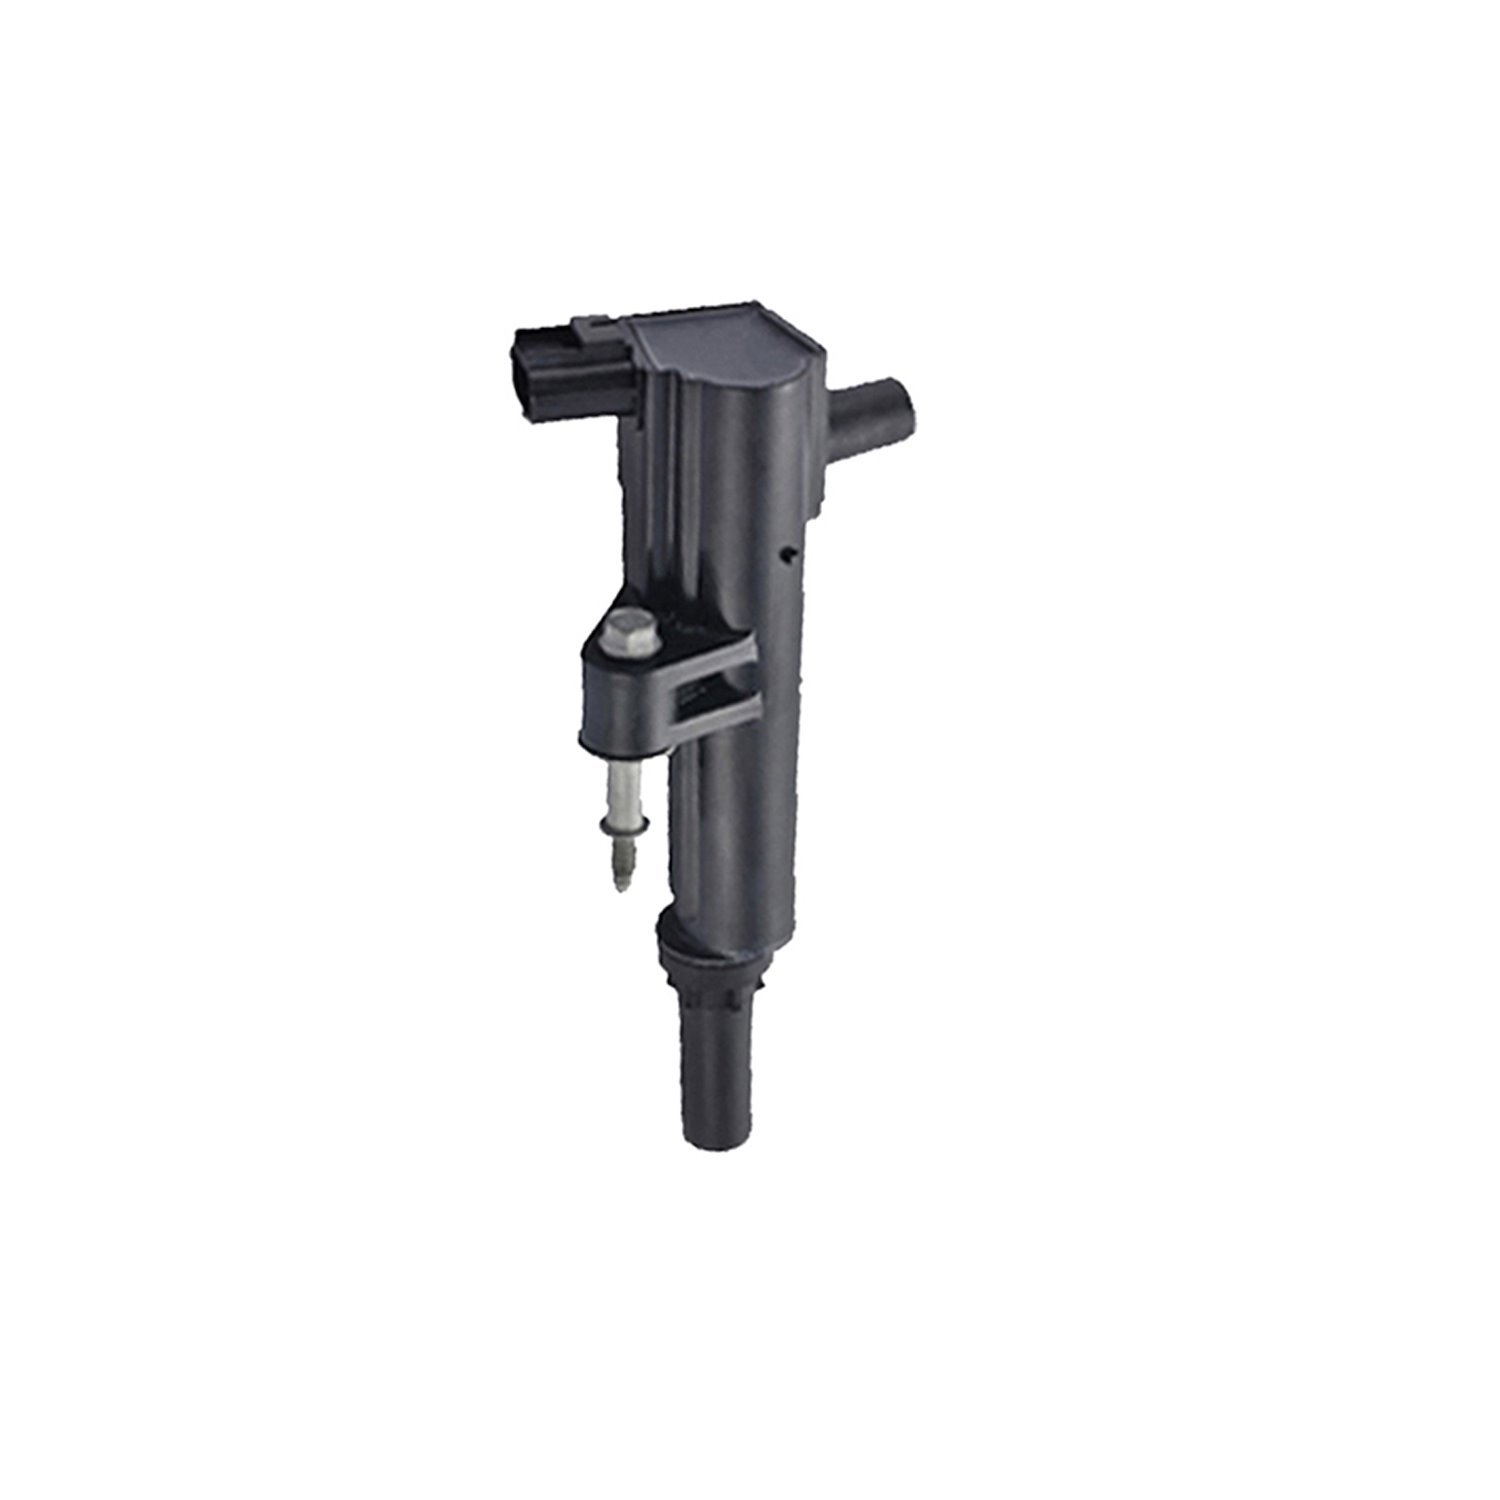 OE Replacement Ignition Coil for Grand Cherokee, Chrysler